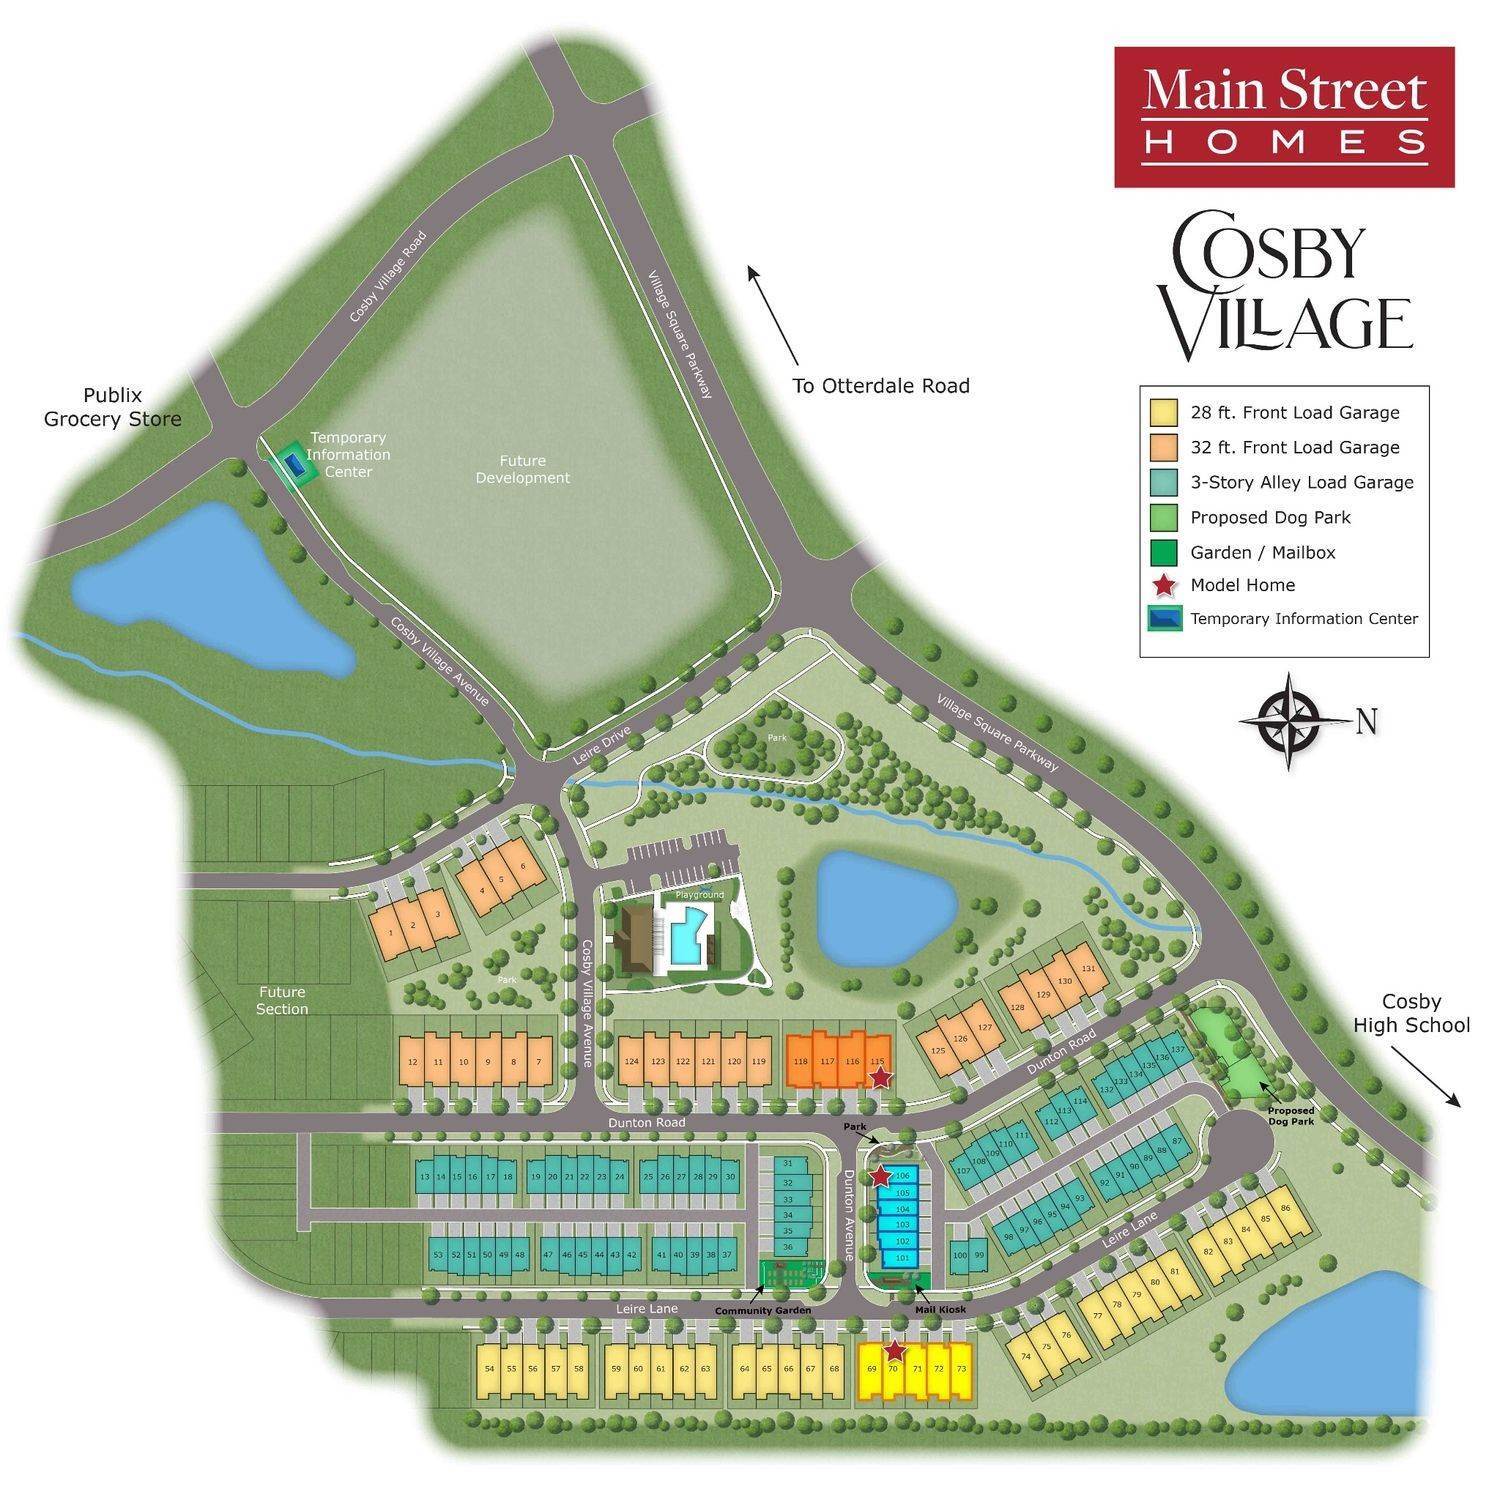 34. Cosby Village 2-Story Townhomes building at 15220 Dunton Avenue, Chesterfield, VA 23832